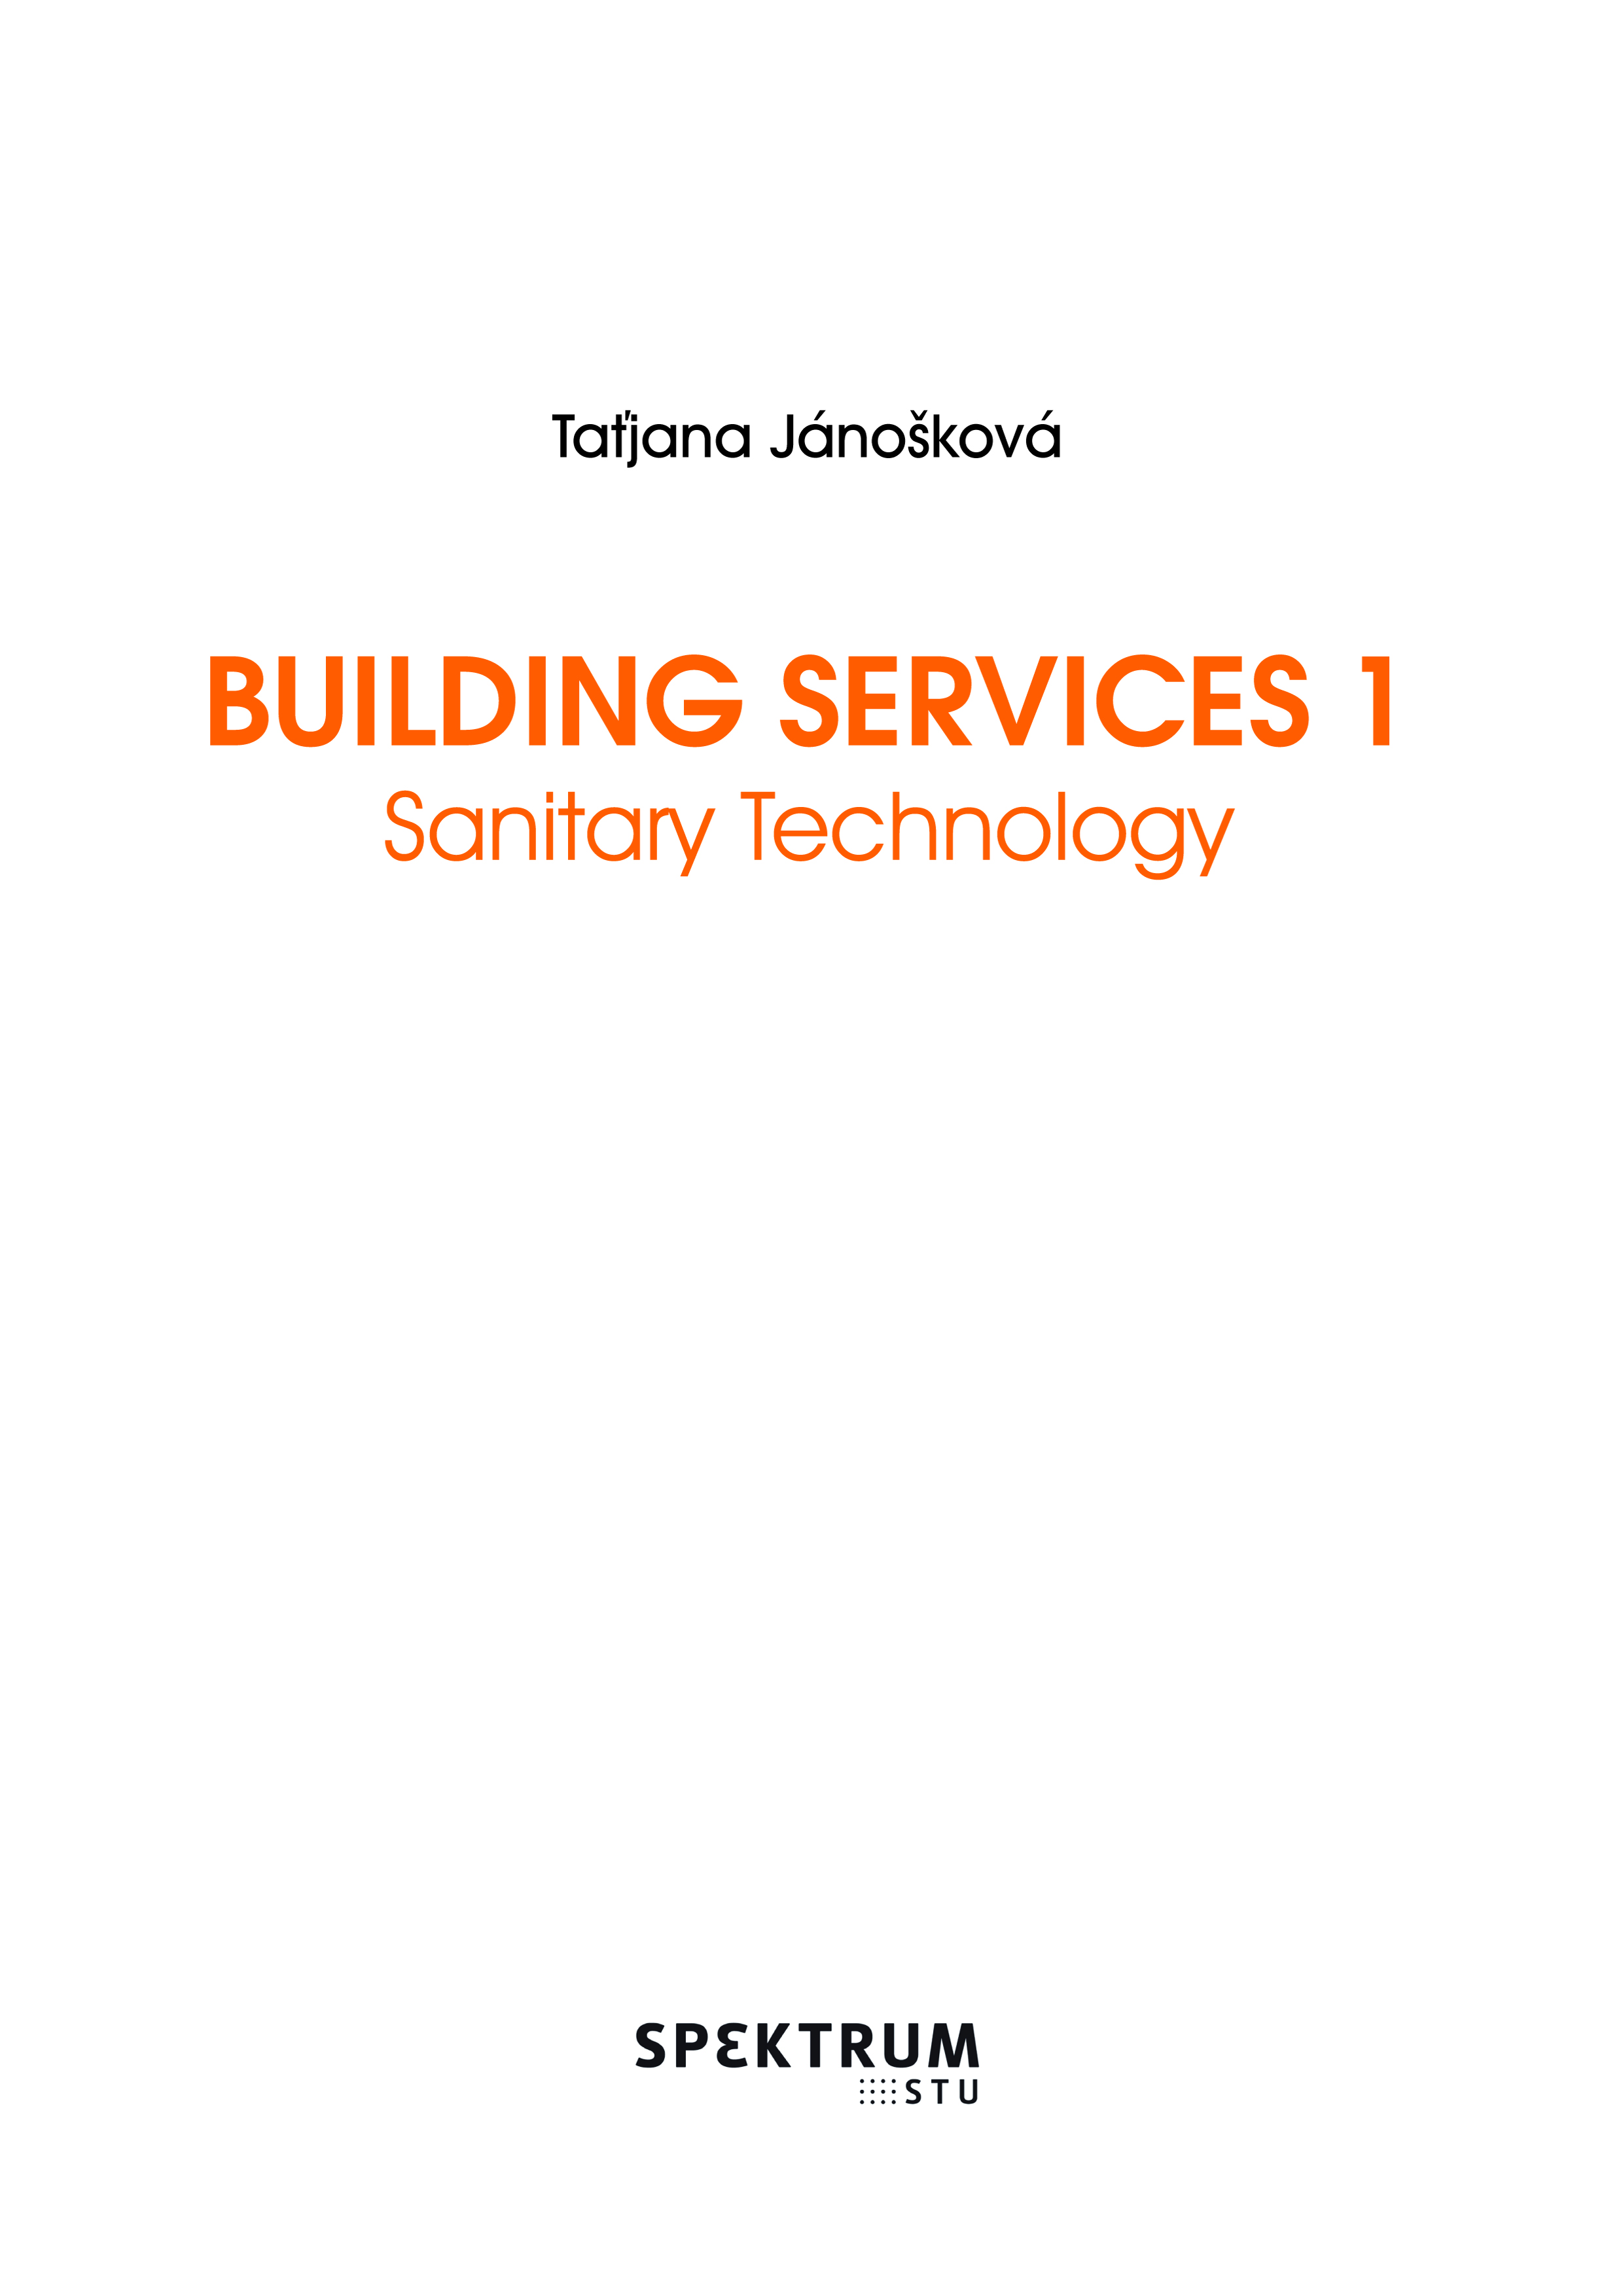 Building Services 1, Sanitary Technology